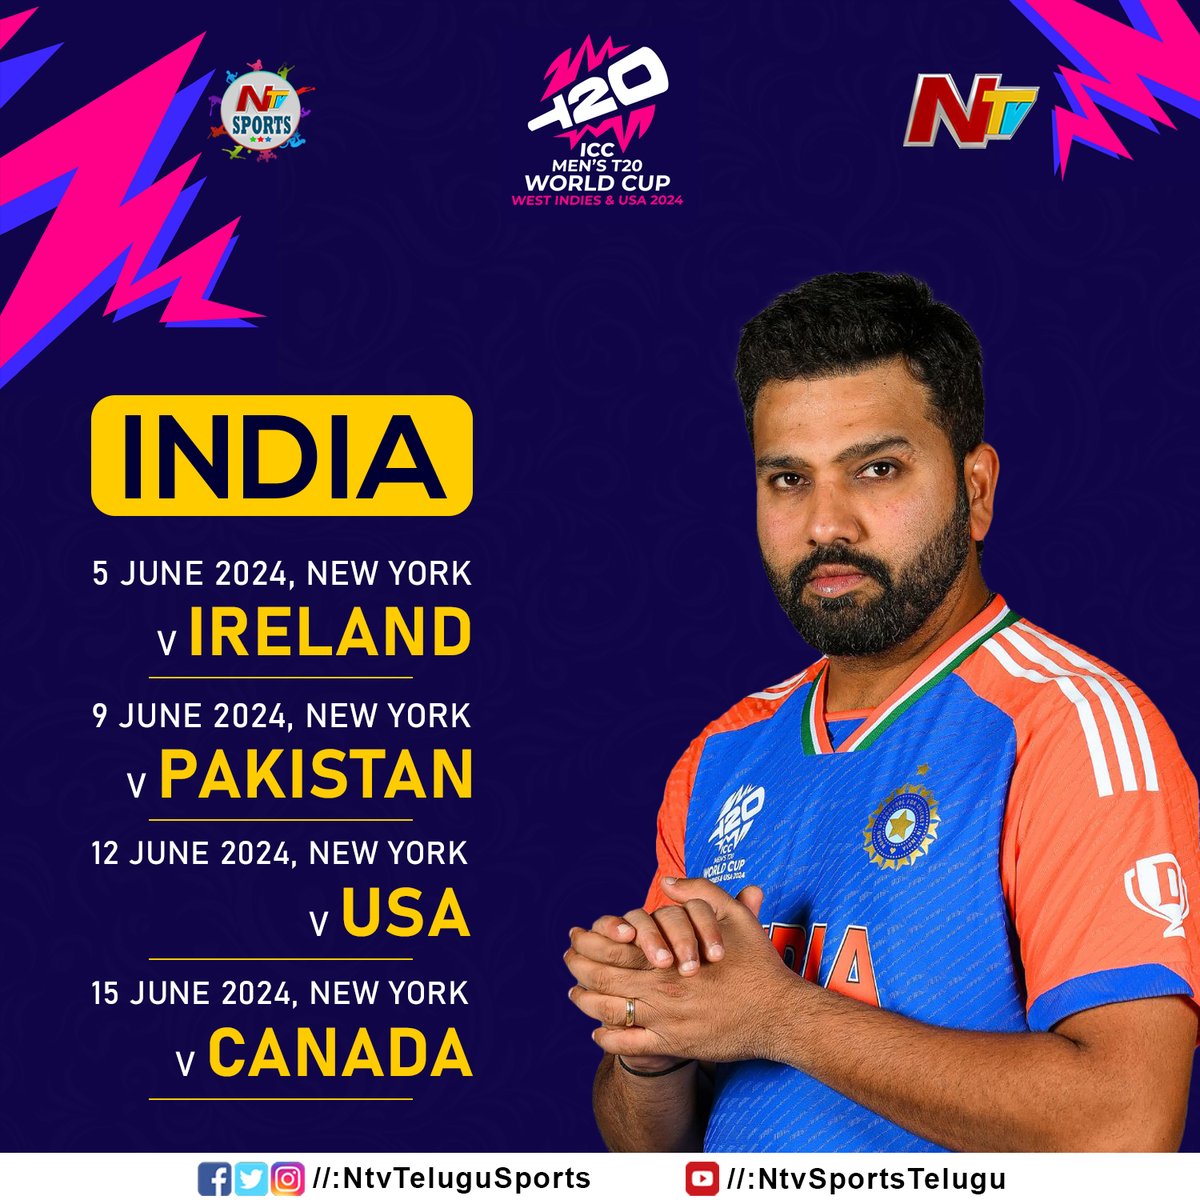 India match schedule, full fixtures list, venues and dates. #T20WorldCup2024 #T20WorldCup #WorlcCup #TeamIndia #NTVSports